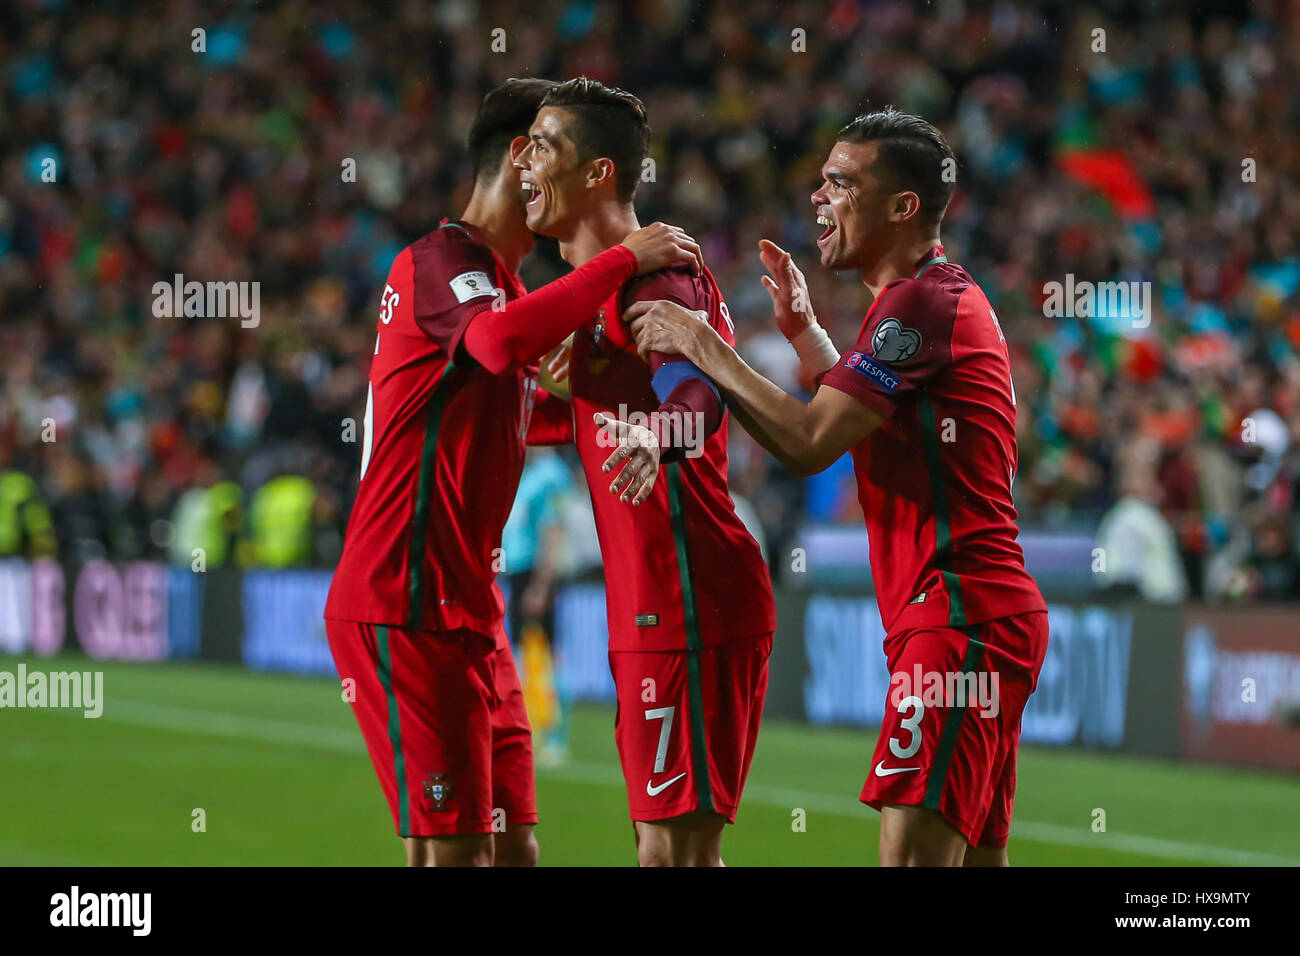 March 25, 2017. Lisbon, Portugal. Portugal's forward Cristiano Ronaldo (7) celebrating after scoring a goal with Portugal's defender Pepe (3) and Portugal's midfielder Andre Gomes (15) during the FIFA 2018 World Cup Qualifier between Portugal v Hungary Credit: Alexandre de Sousa/Alamy Live News Stock Photo